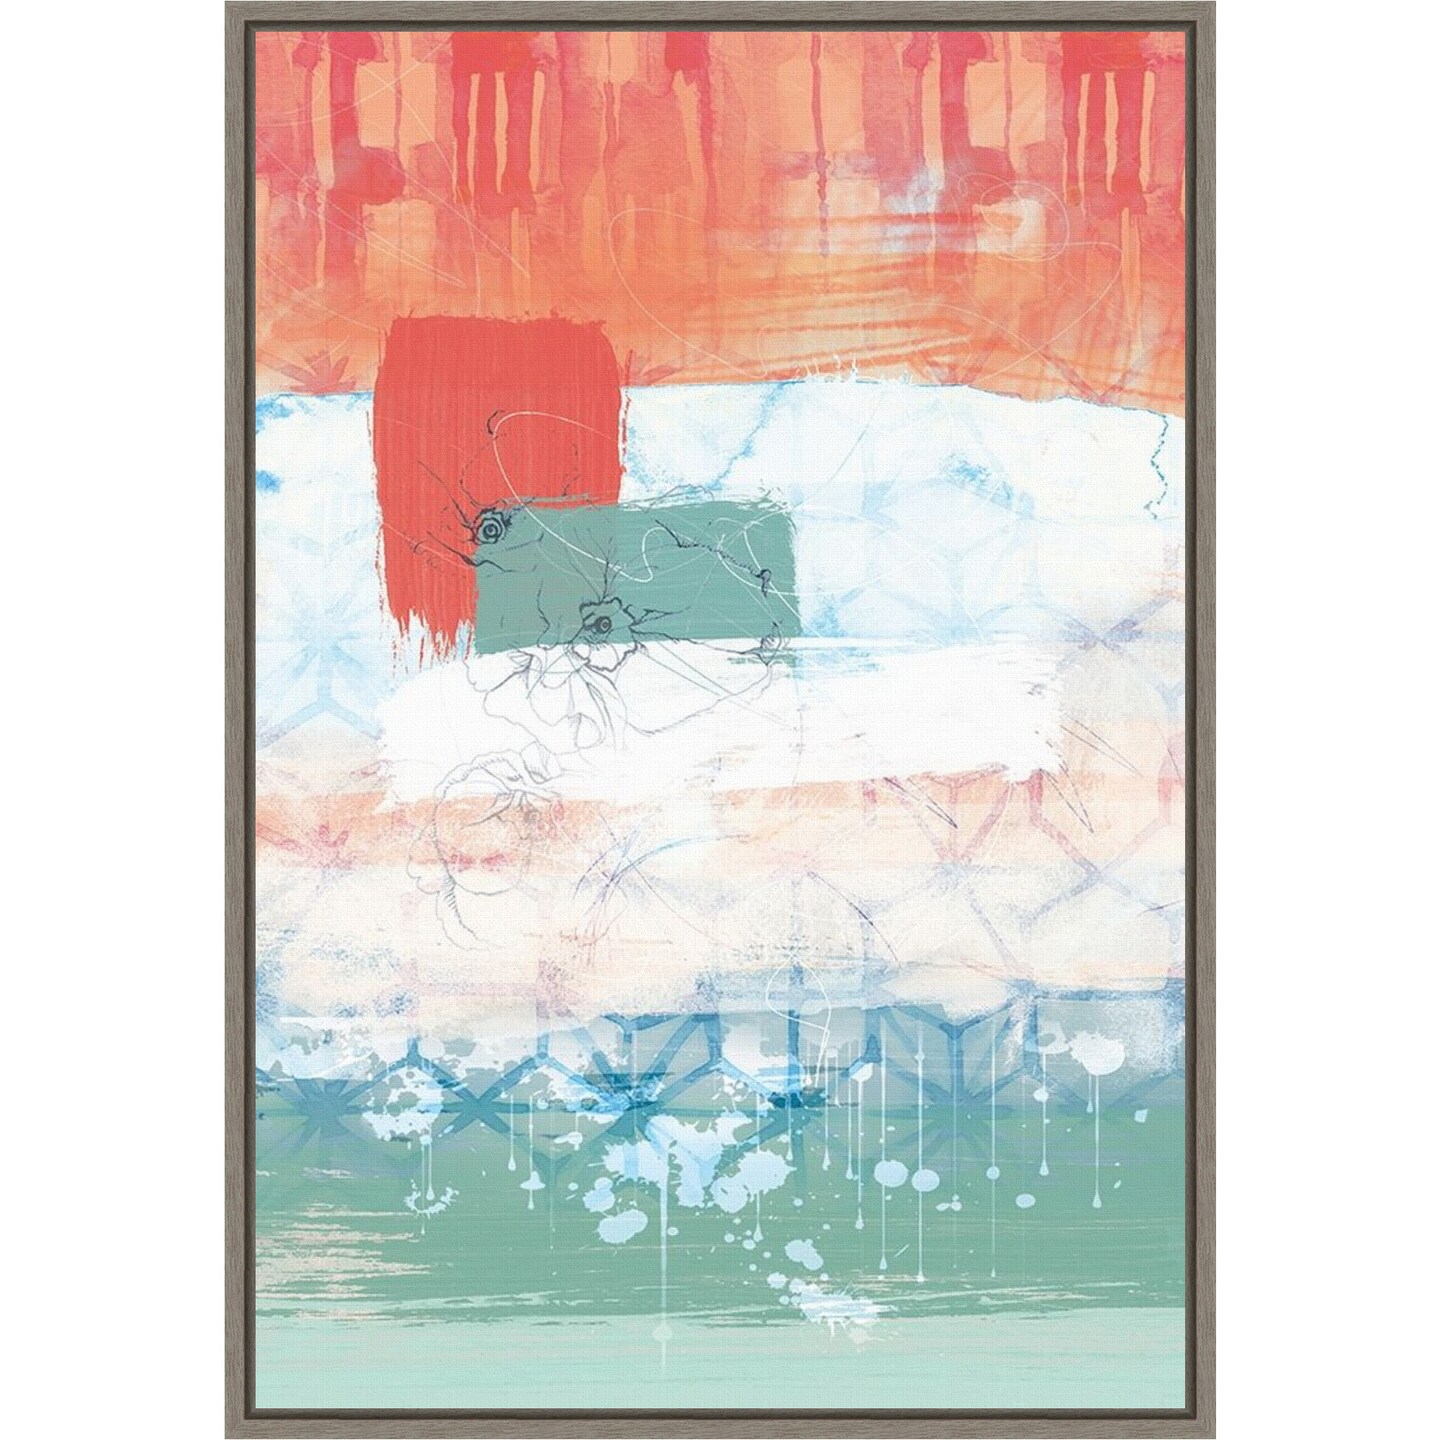 Unexpected Bloom No. 2 by Louis Duncan-He 16-in. W x 23-in. H. Canvas Wall Art Print Framed in Grey